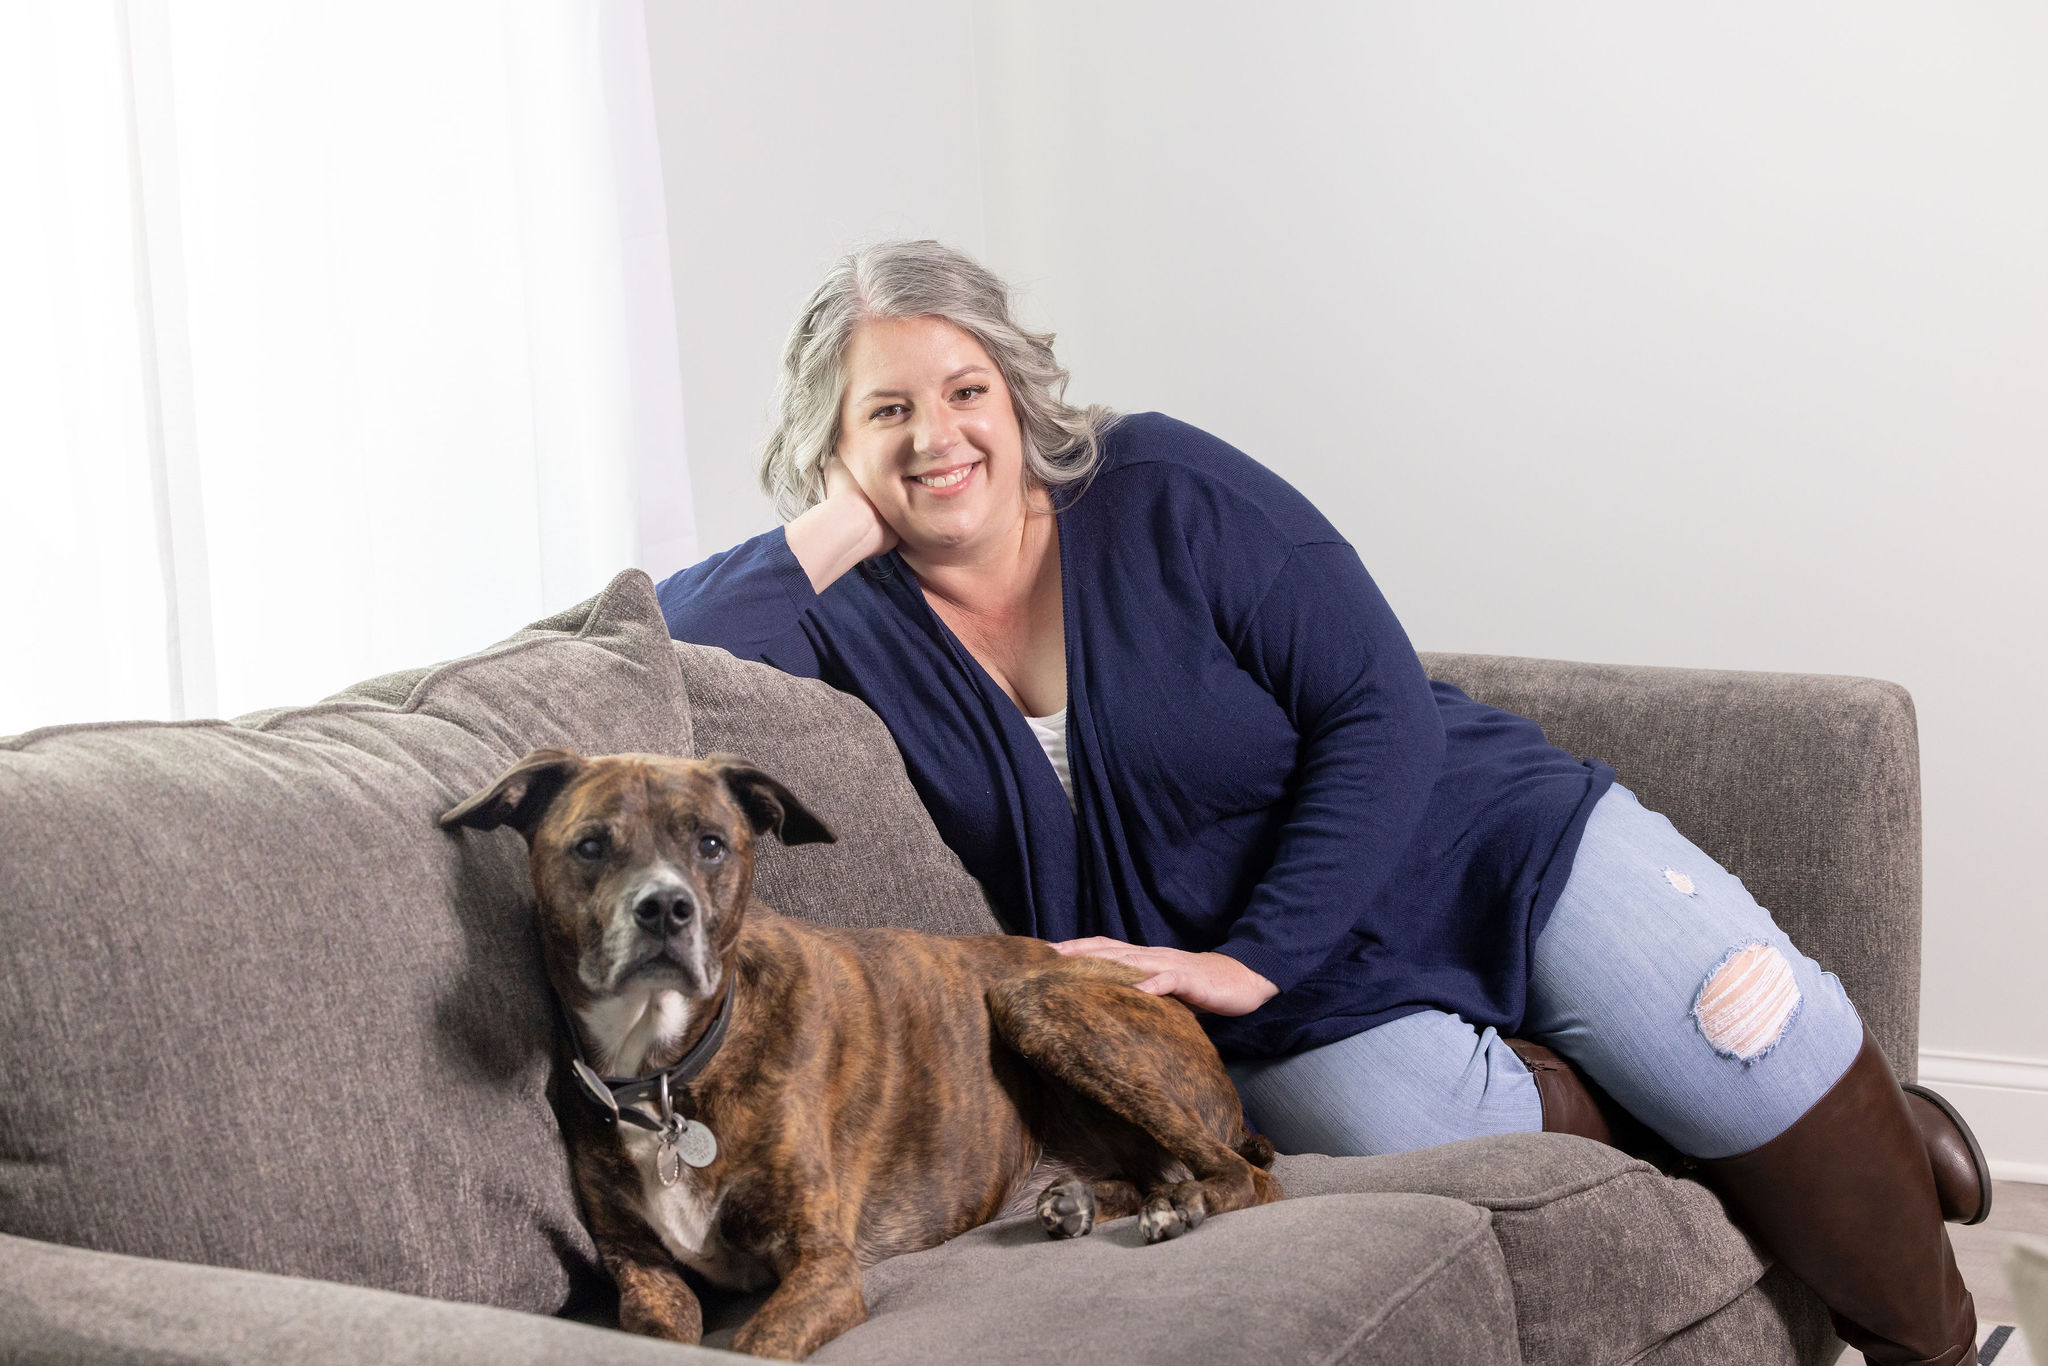 Betsy Bird, and her dog, Nitro posed on couch. Betsy is a horse and pet photographer in Tennessee